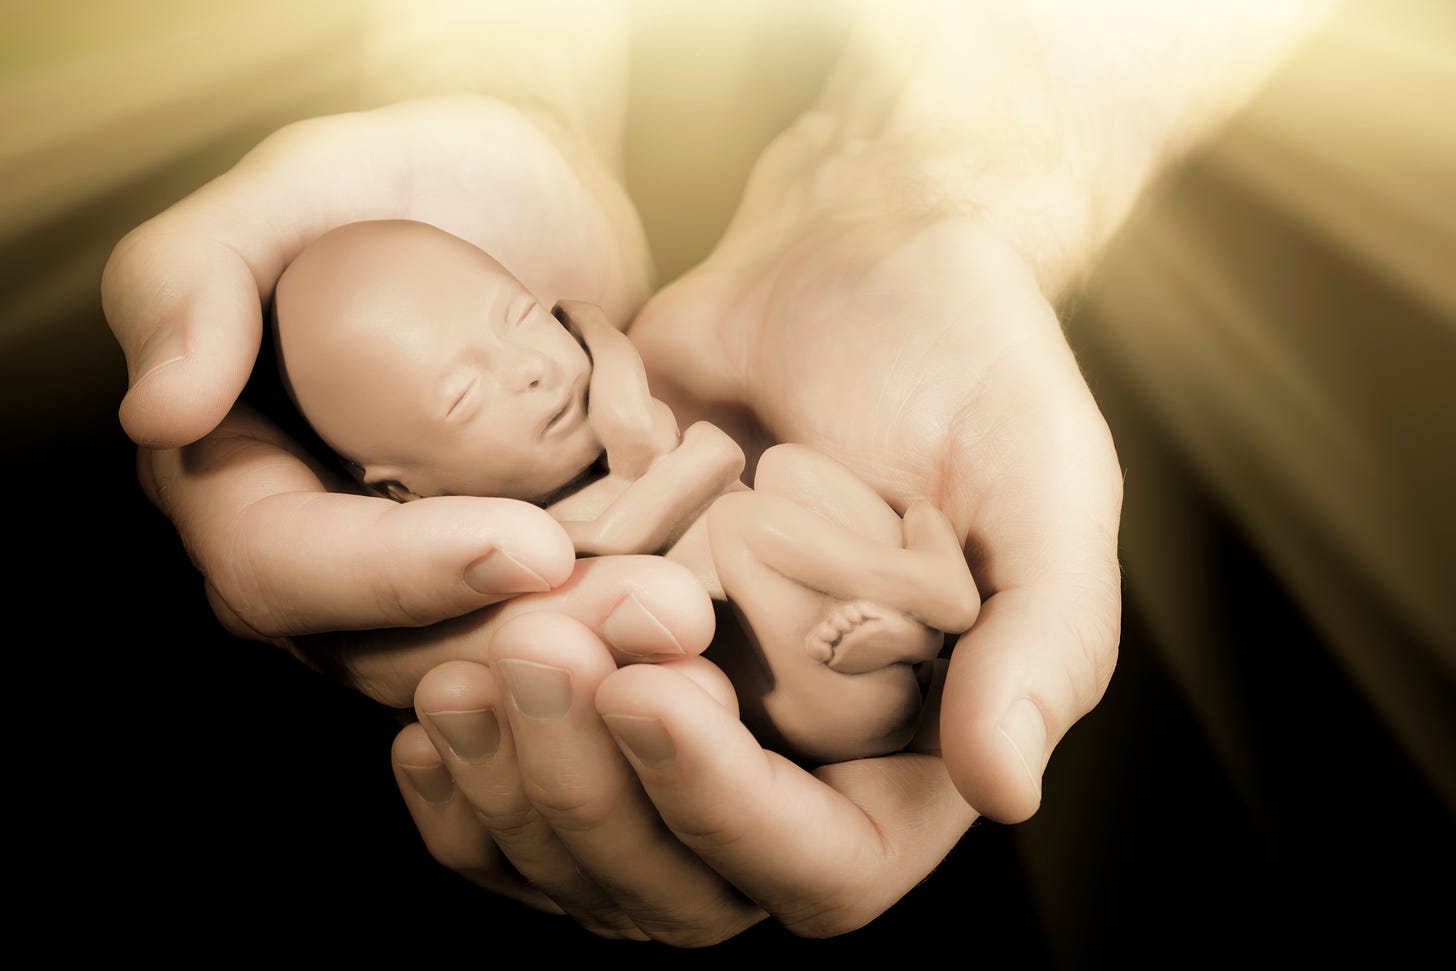 preborn baby, cradled in person's hands, second-trimester abortion